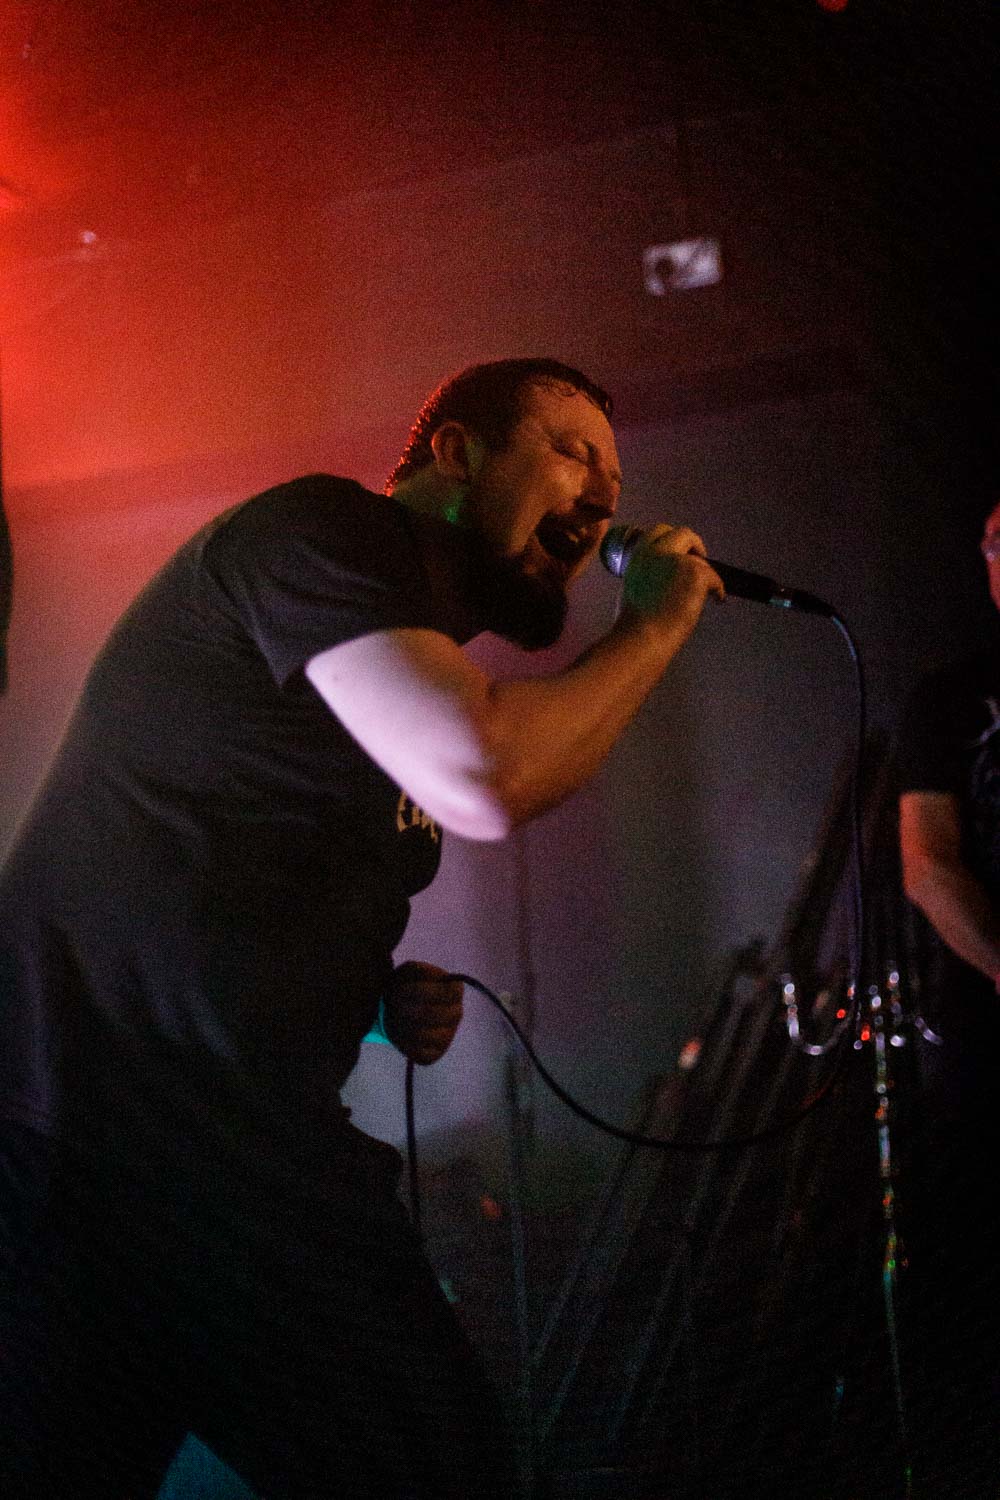 Ba'al at The Outpost in Liverpool on July 11th 2019 